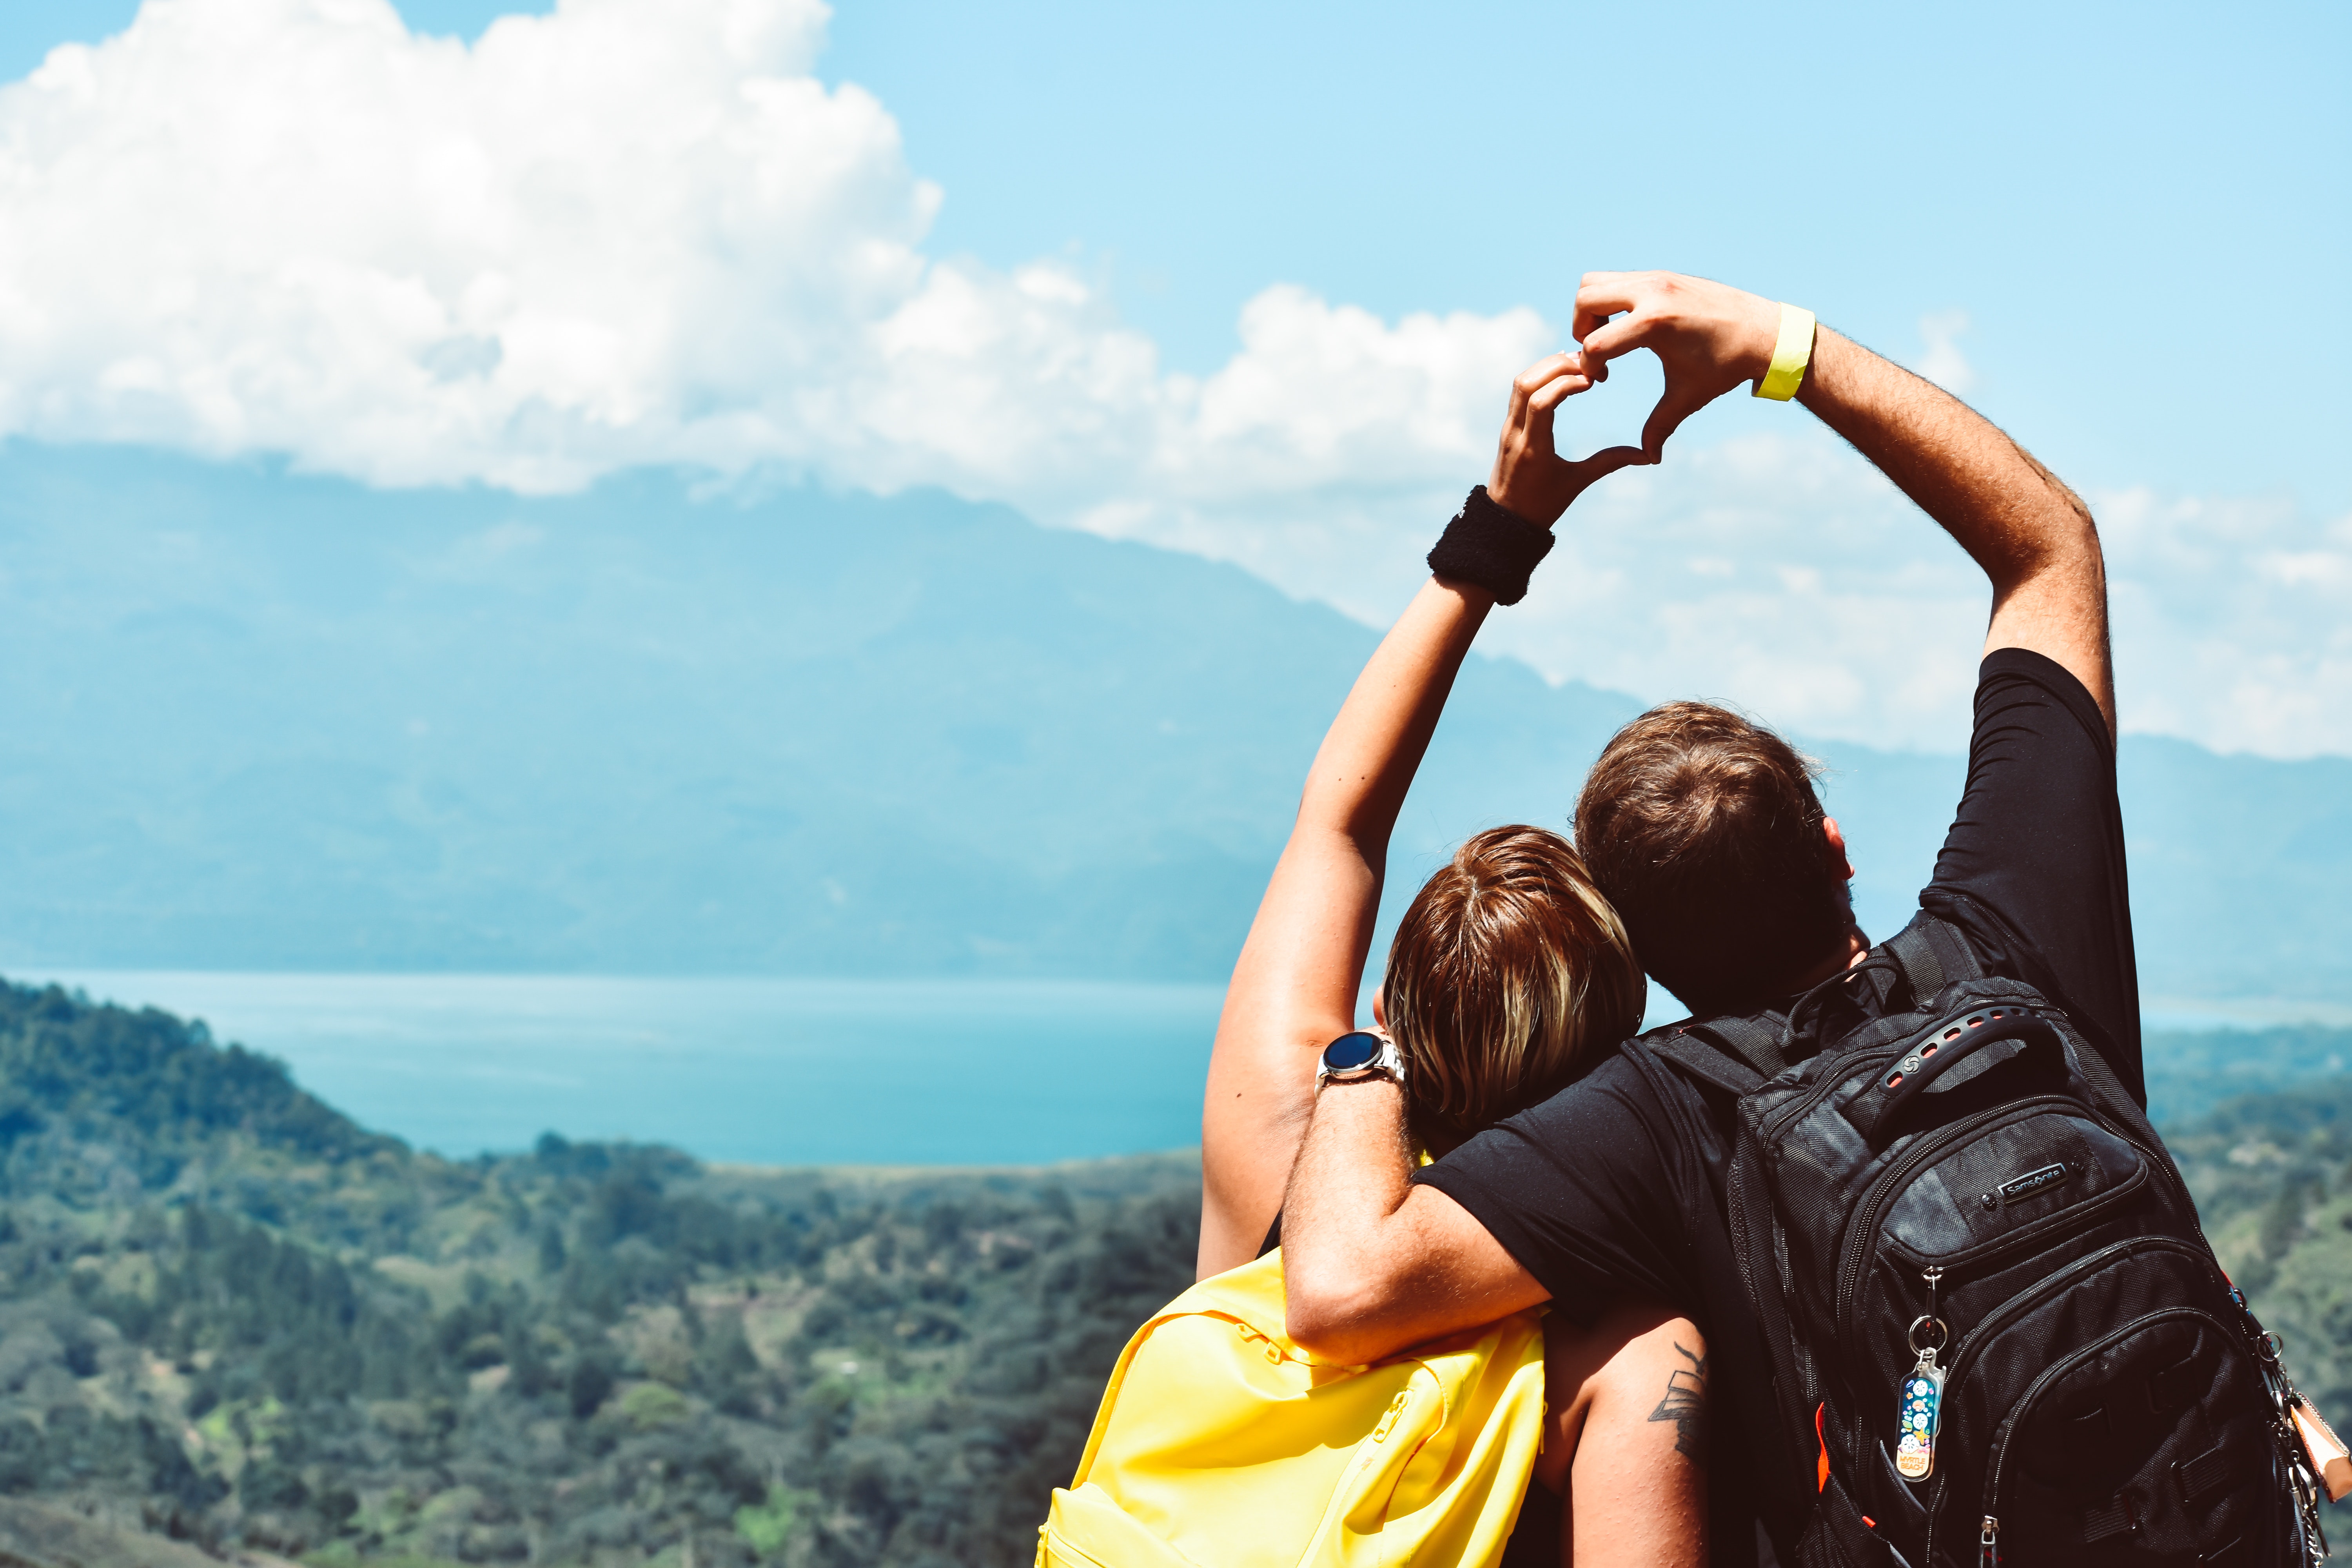 A couple hiking and creating a heart shape with their hands. | Source: Pexels